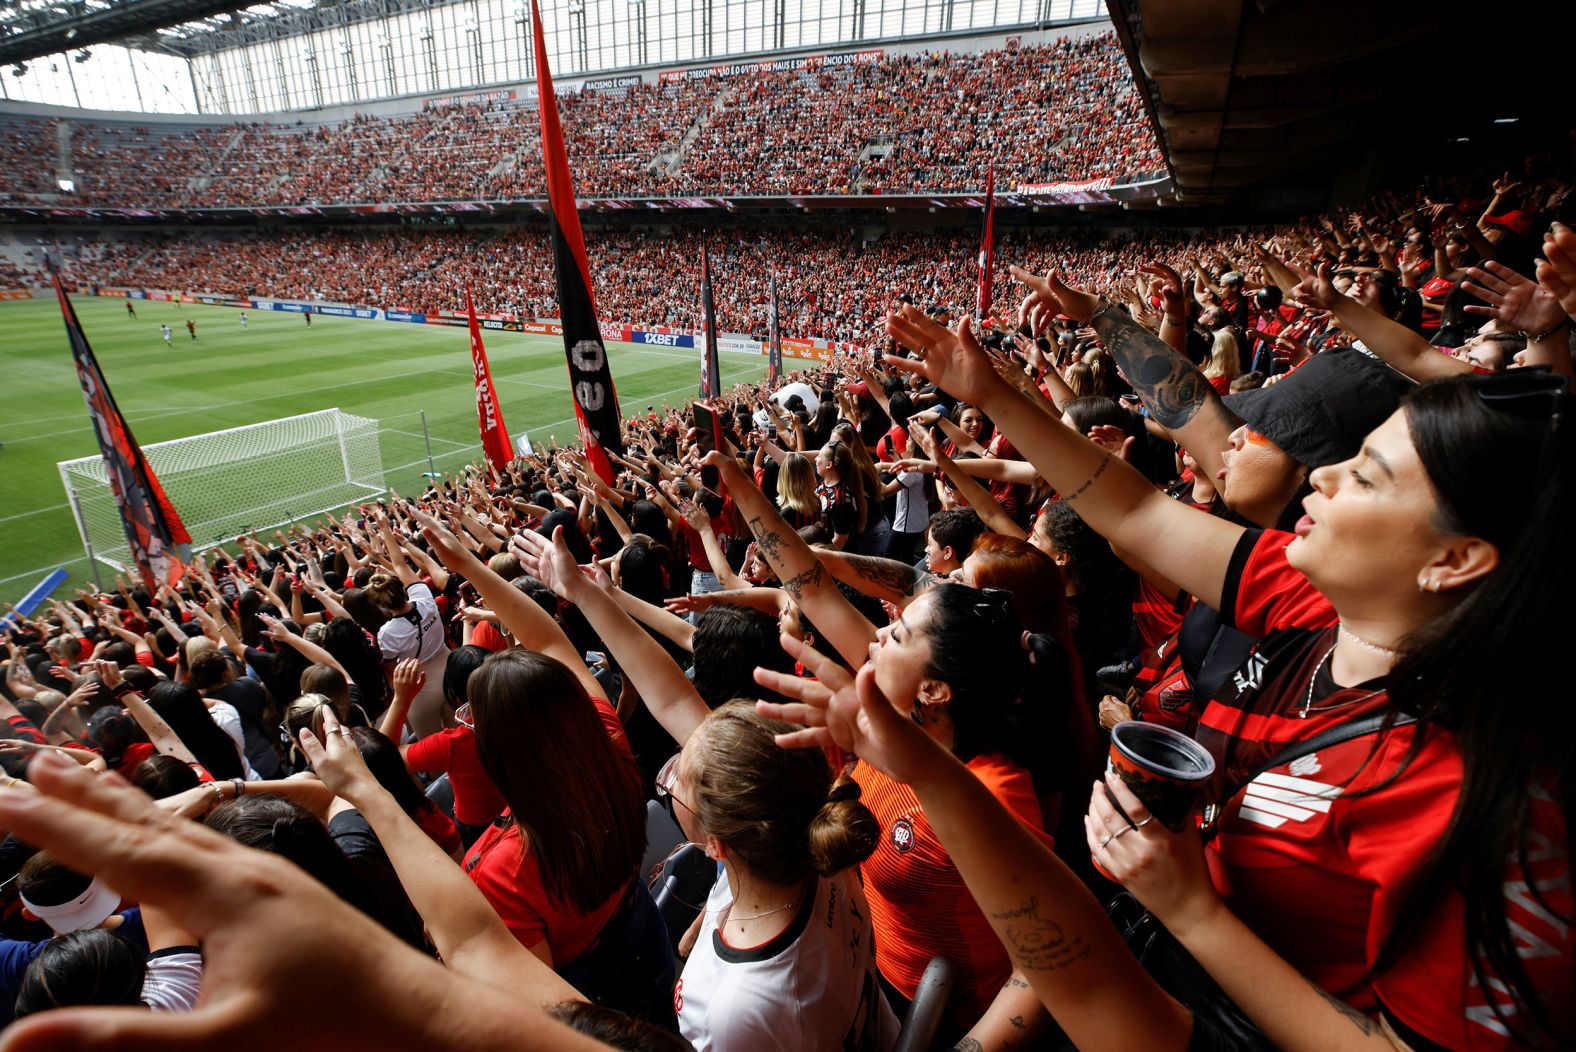 Fans of the Brazilian soccer club Athletico Paranaense attend a match in Curitiba on Saturday, January 21. Only women and children under 12 could attend the match. <a href="https://westobserver.com/news/latin-america/athletico-pr-places-only-women-and-children-in-the-stadium-after-punishment-by-the-twisted-brigade/" target="_blank" target="_blank">Others were barred</a> as punishment for fights that had broken out in the stands at a match last year.